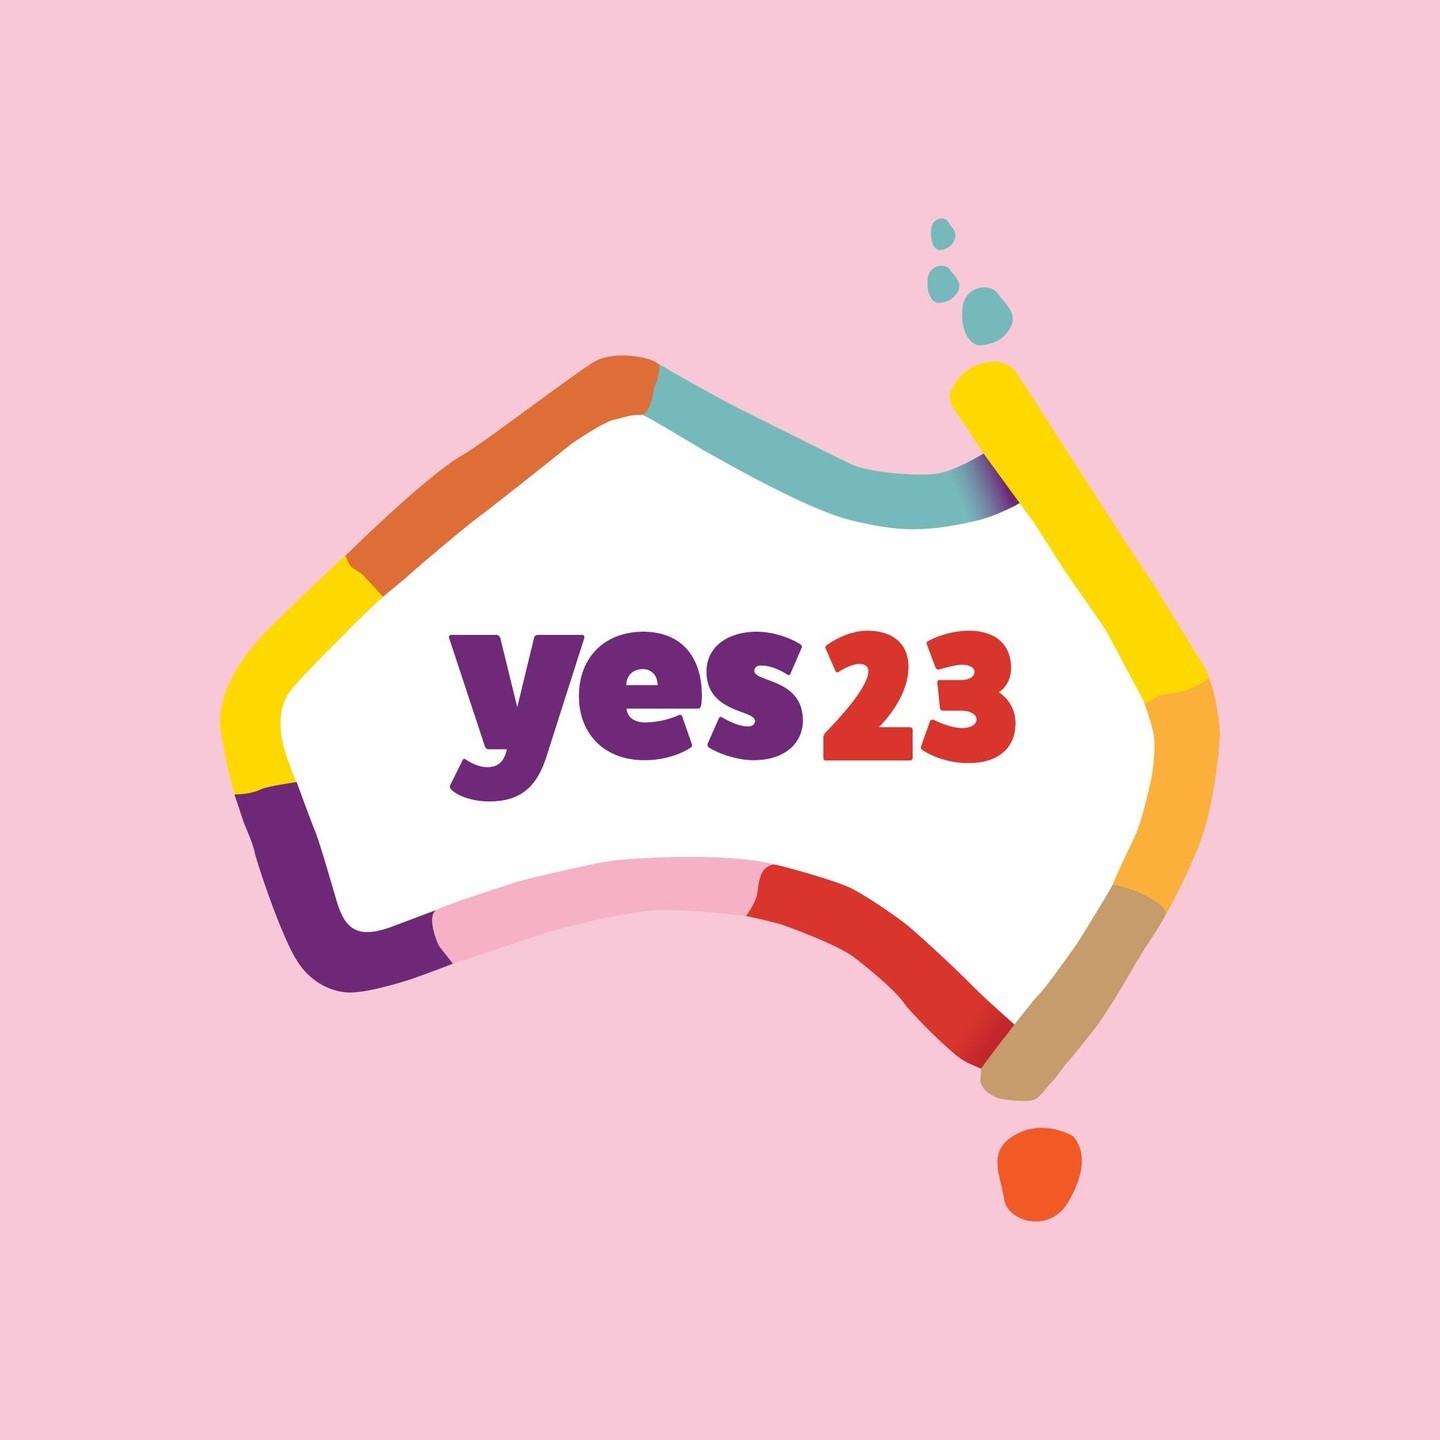 Yes 23